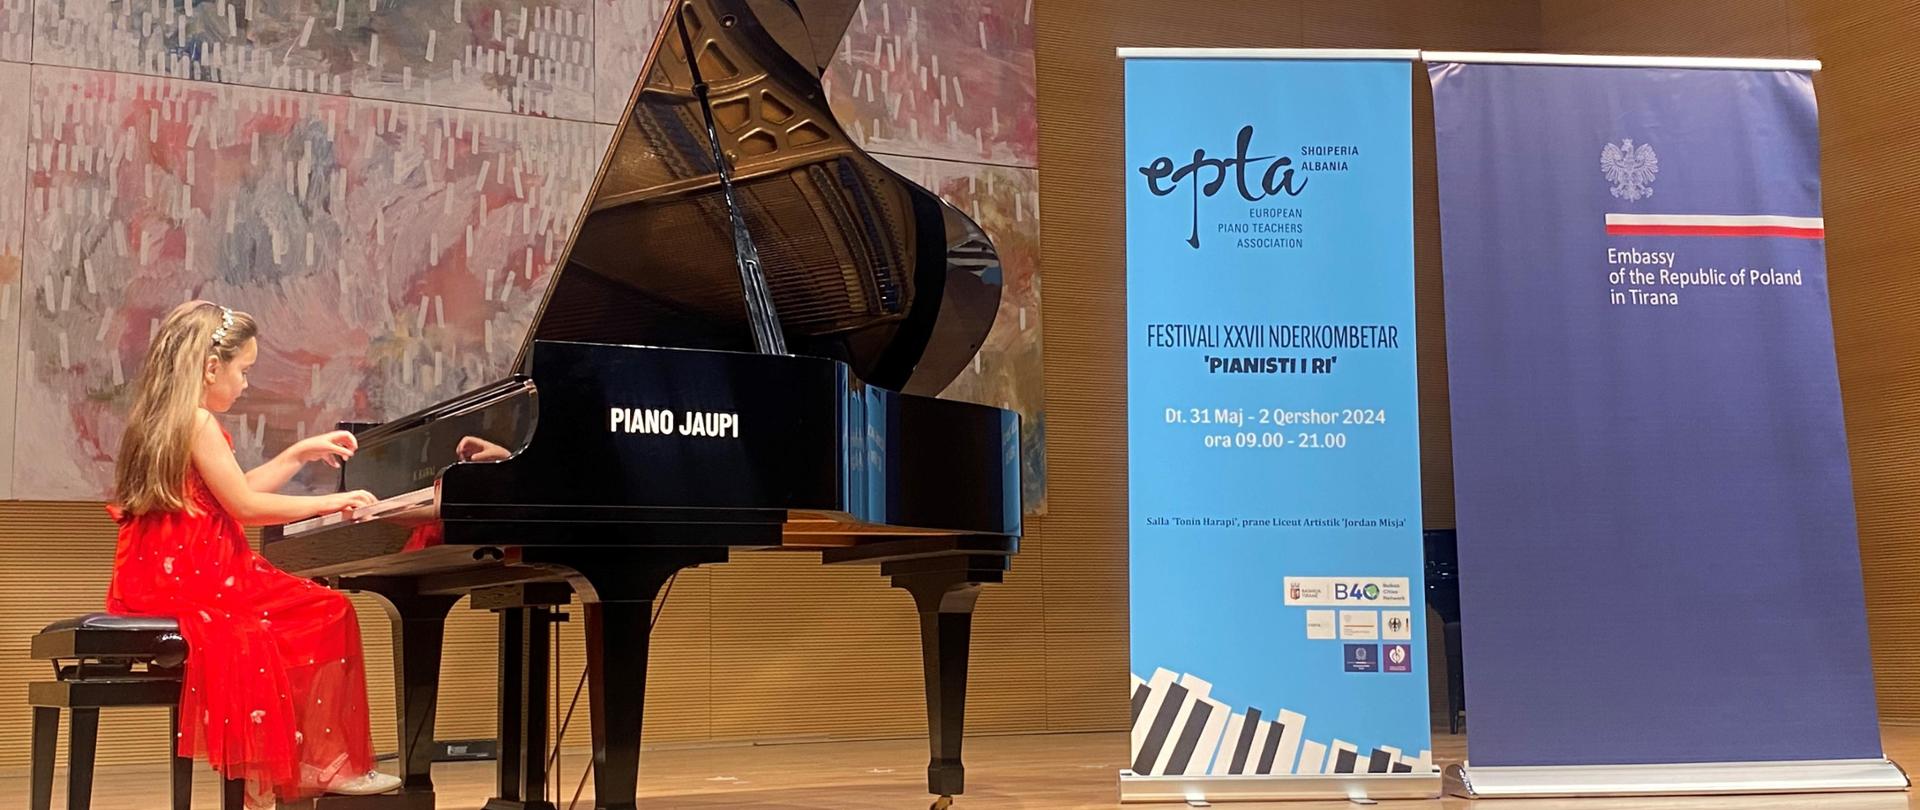 Grand finale of the 27th International Piano Festival EPTA Albania “The Young Pianist”